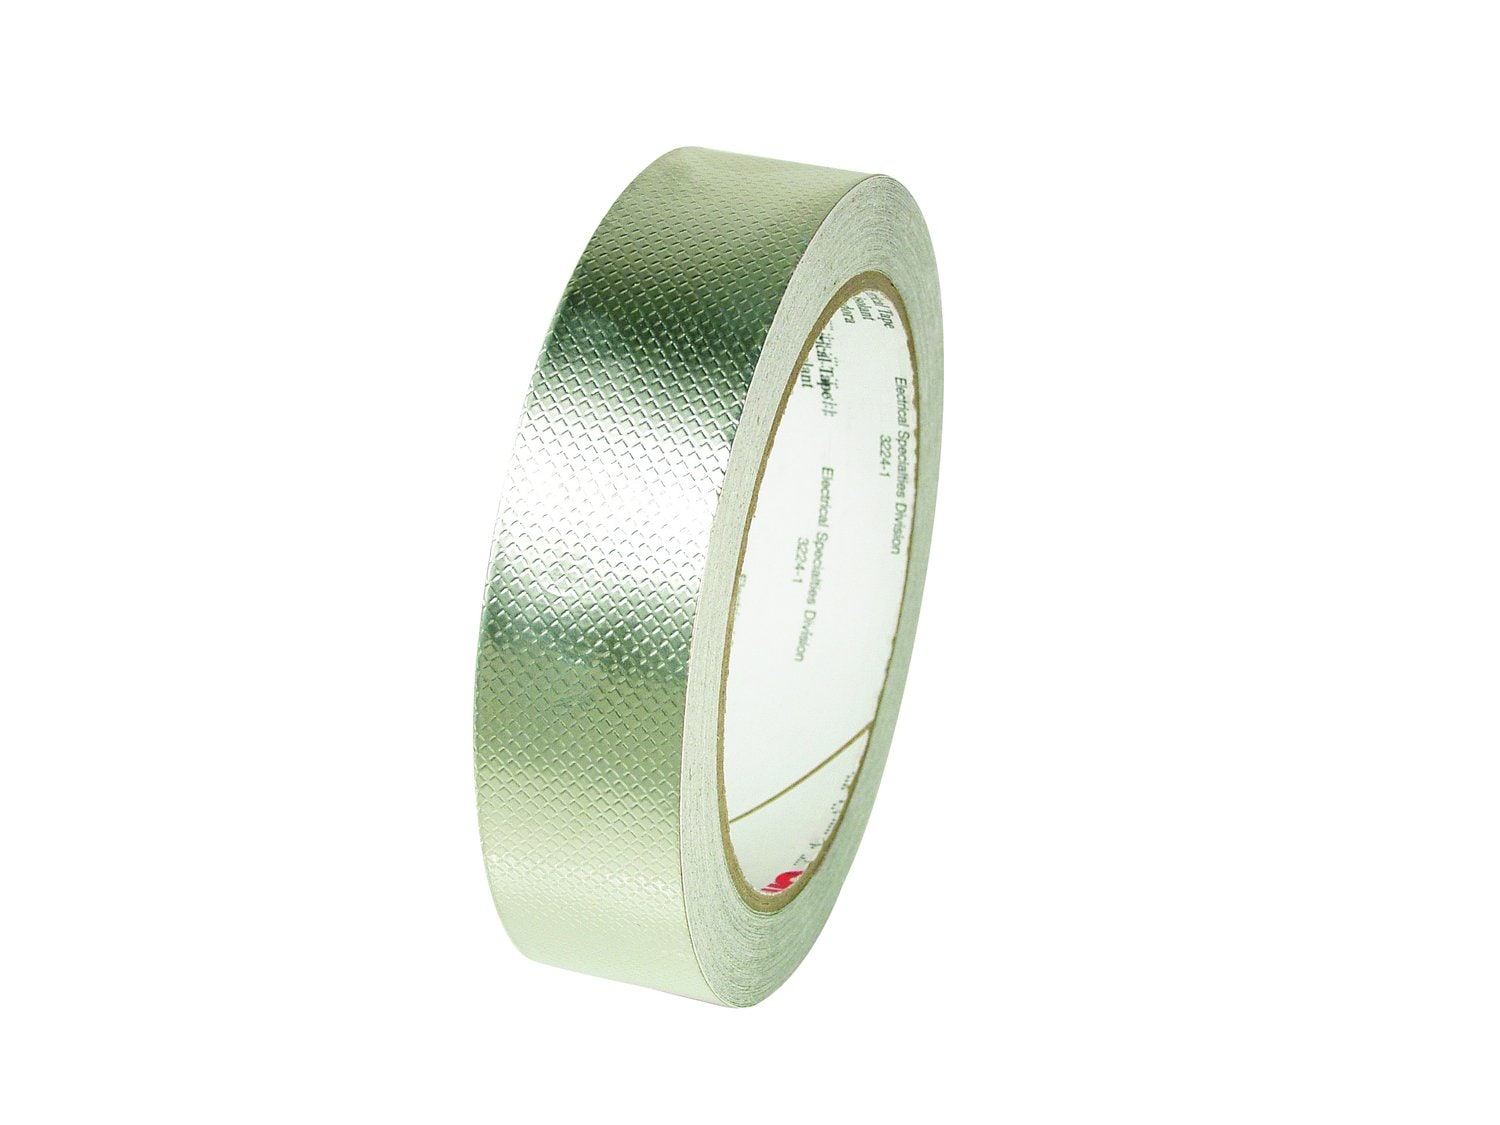 Colored Glossy Vinyl Tape, with Self-Adhesive (2 Tapes 1 inch x 25 ft (50  ft Total), Gold Metallic)